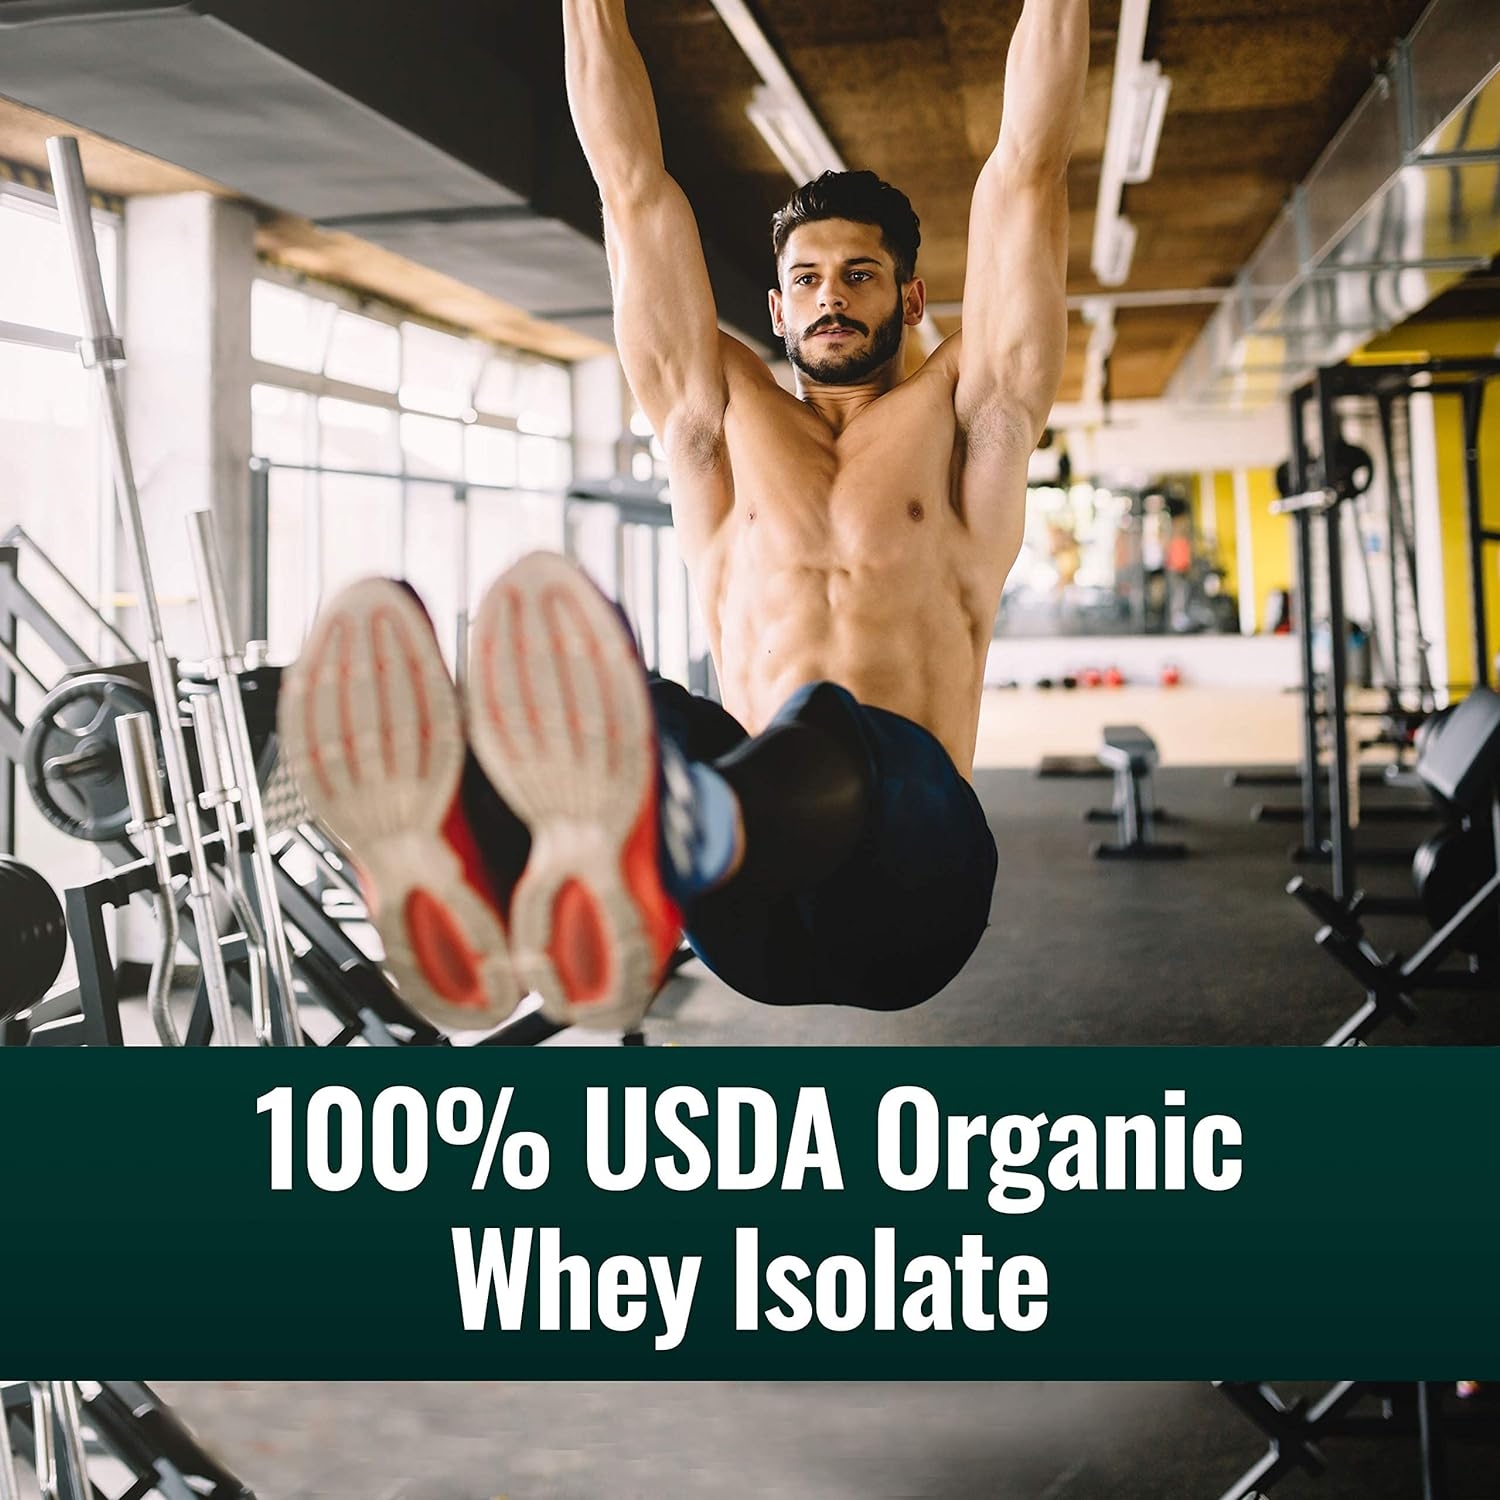 100% Organic Whey Isolate Protein Powder - USDA Organic Certified and Grass Fed – Low Carb, Lab Tested, Delicious Milk Chocolate Flavor *Made and Sourced in The U.S.A.* by Natural Force, 13.8 Ounce